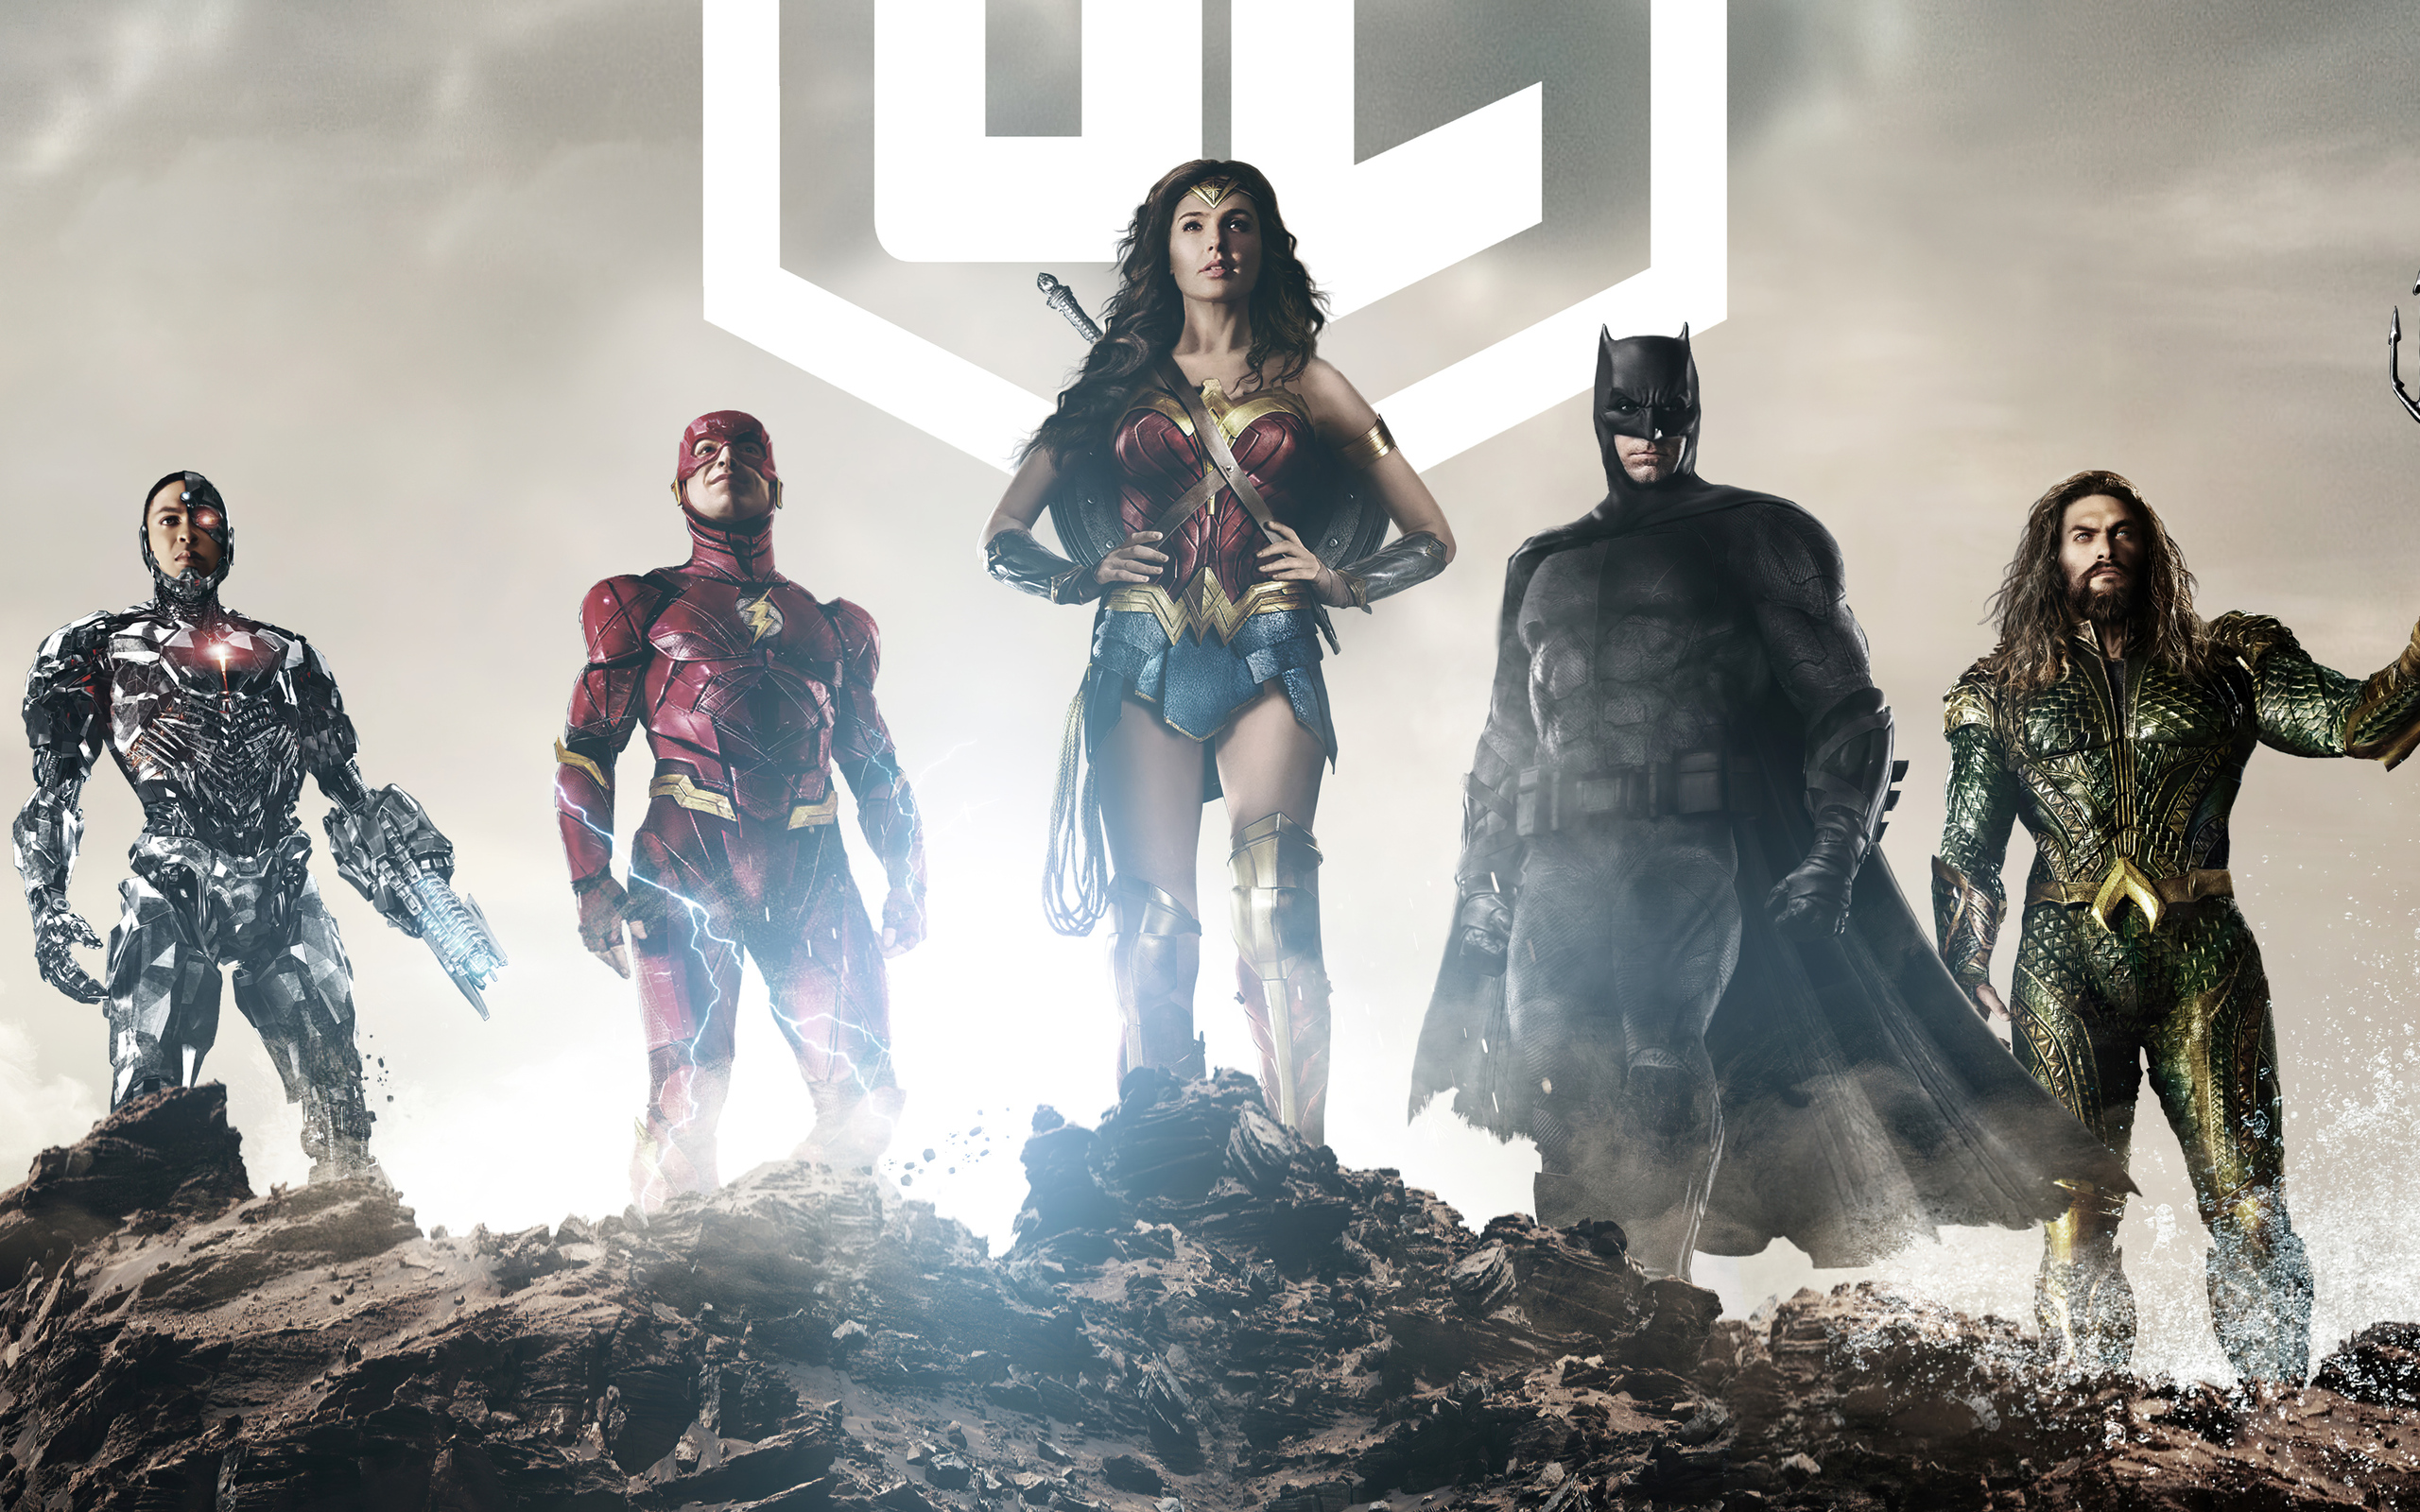 Justice League Synder Cut 4k In 2560x1600 Resolution. justice-league-synder...